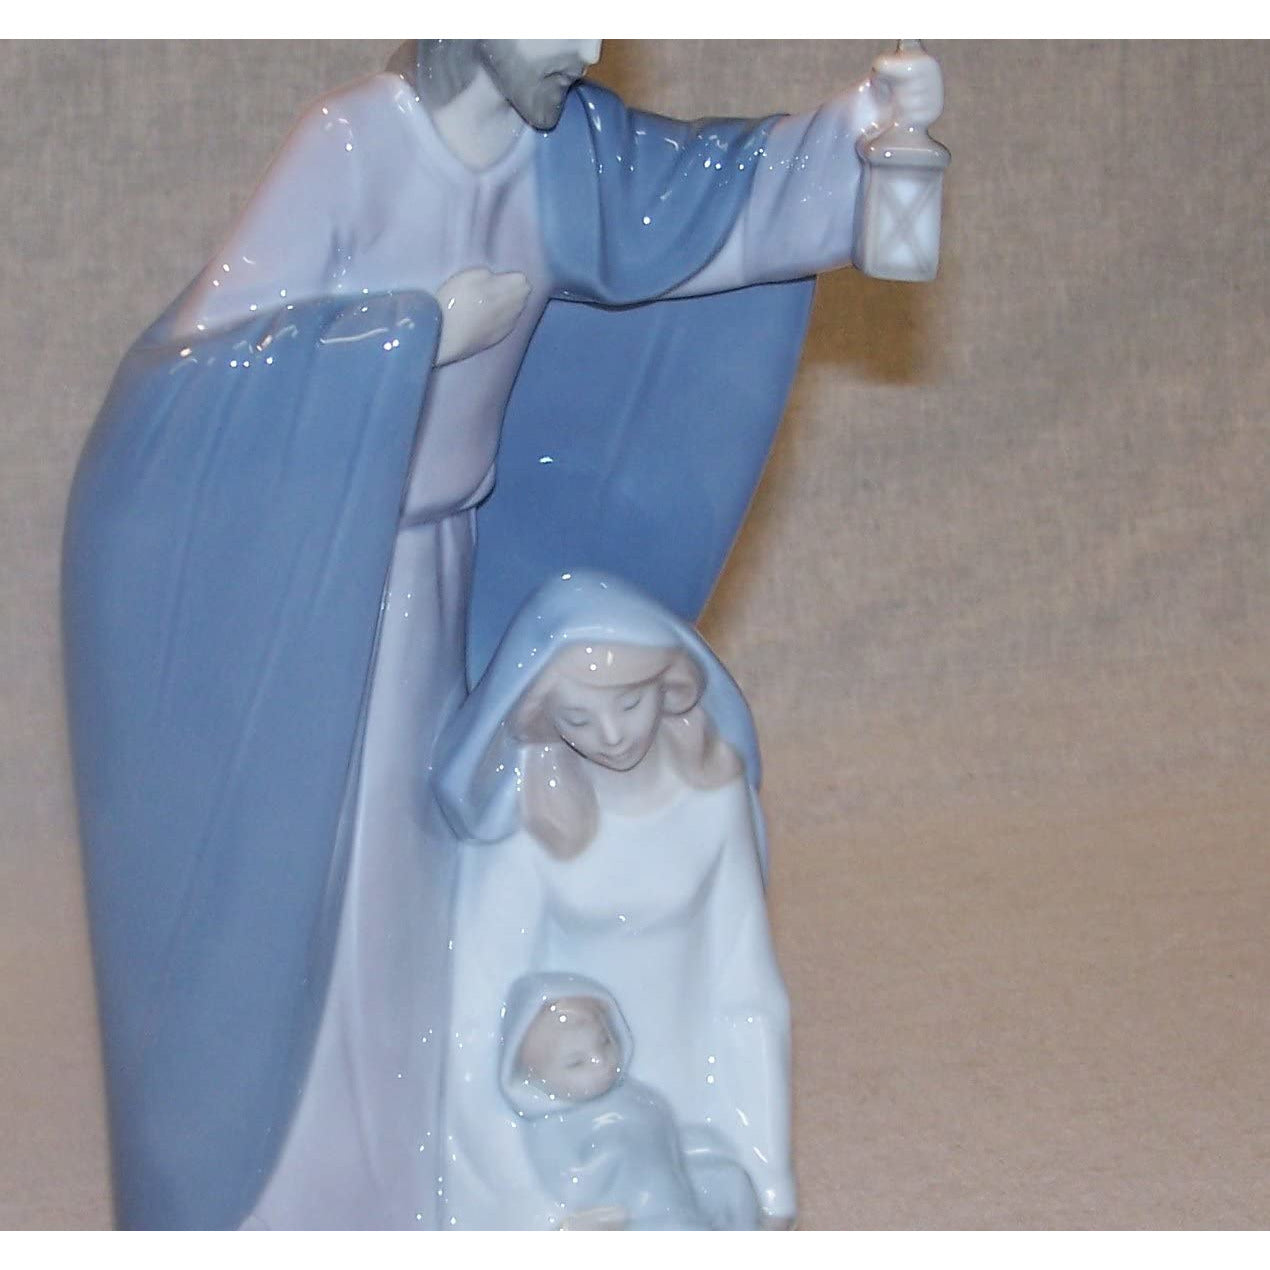 Nao by Lladro Collectible Porcelain Figurine: THE NATIVITY OF JESUS - 9 1/2" tall - Joseph, Mary, and baby Jesus...